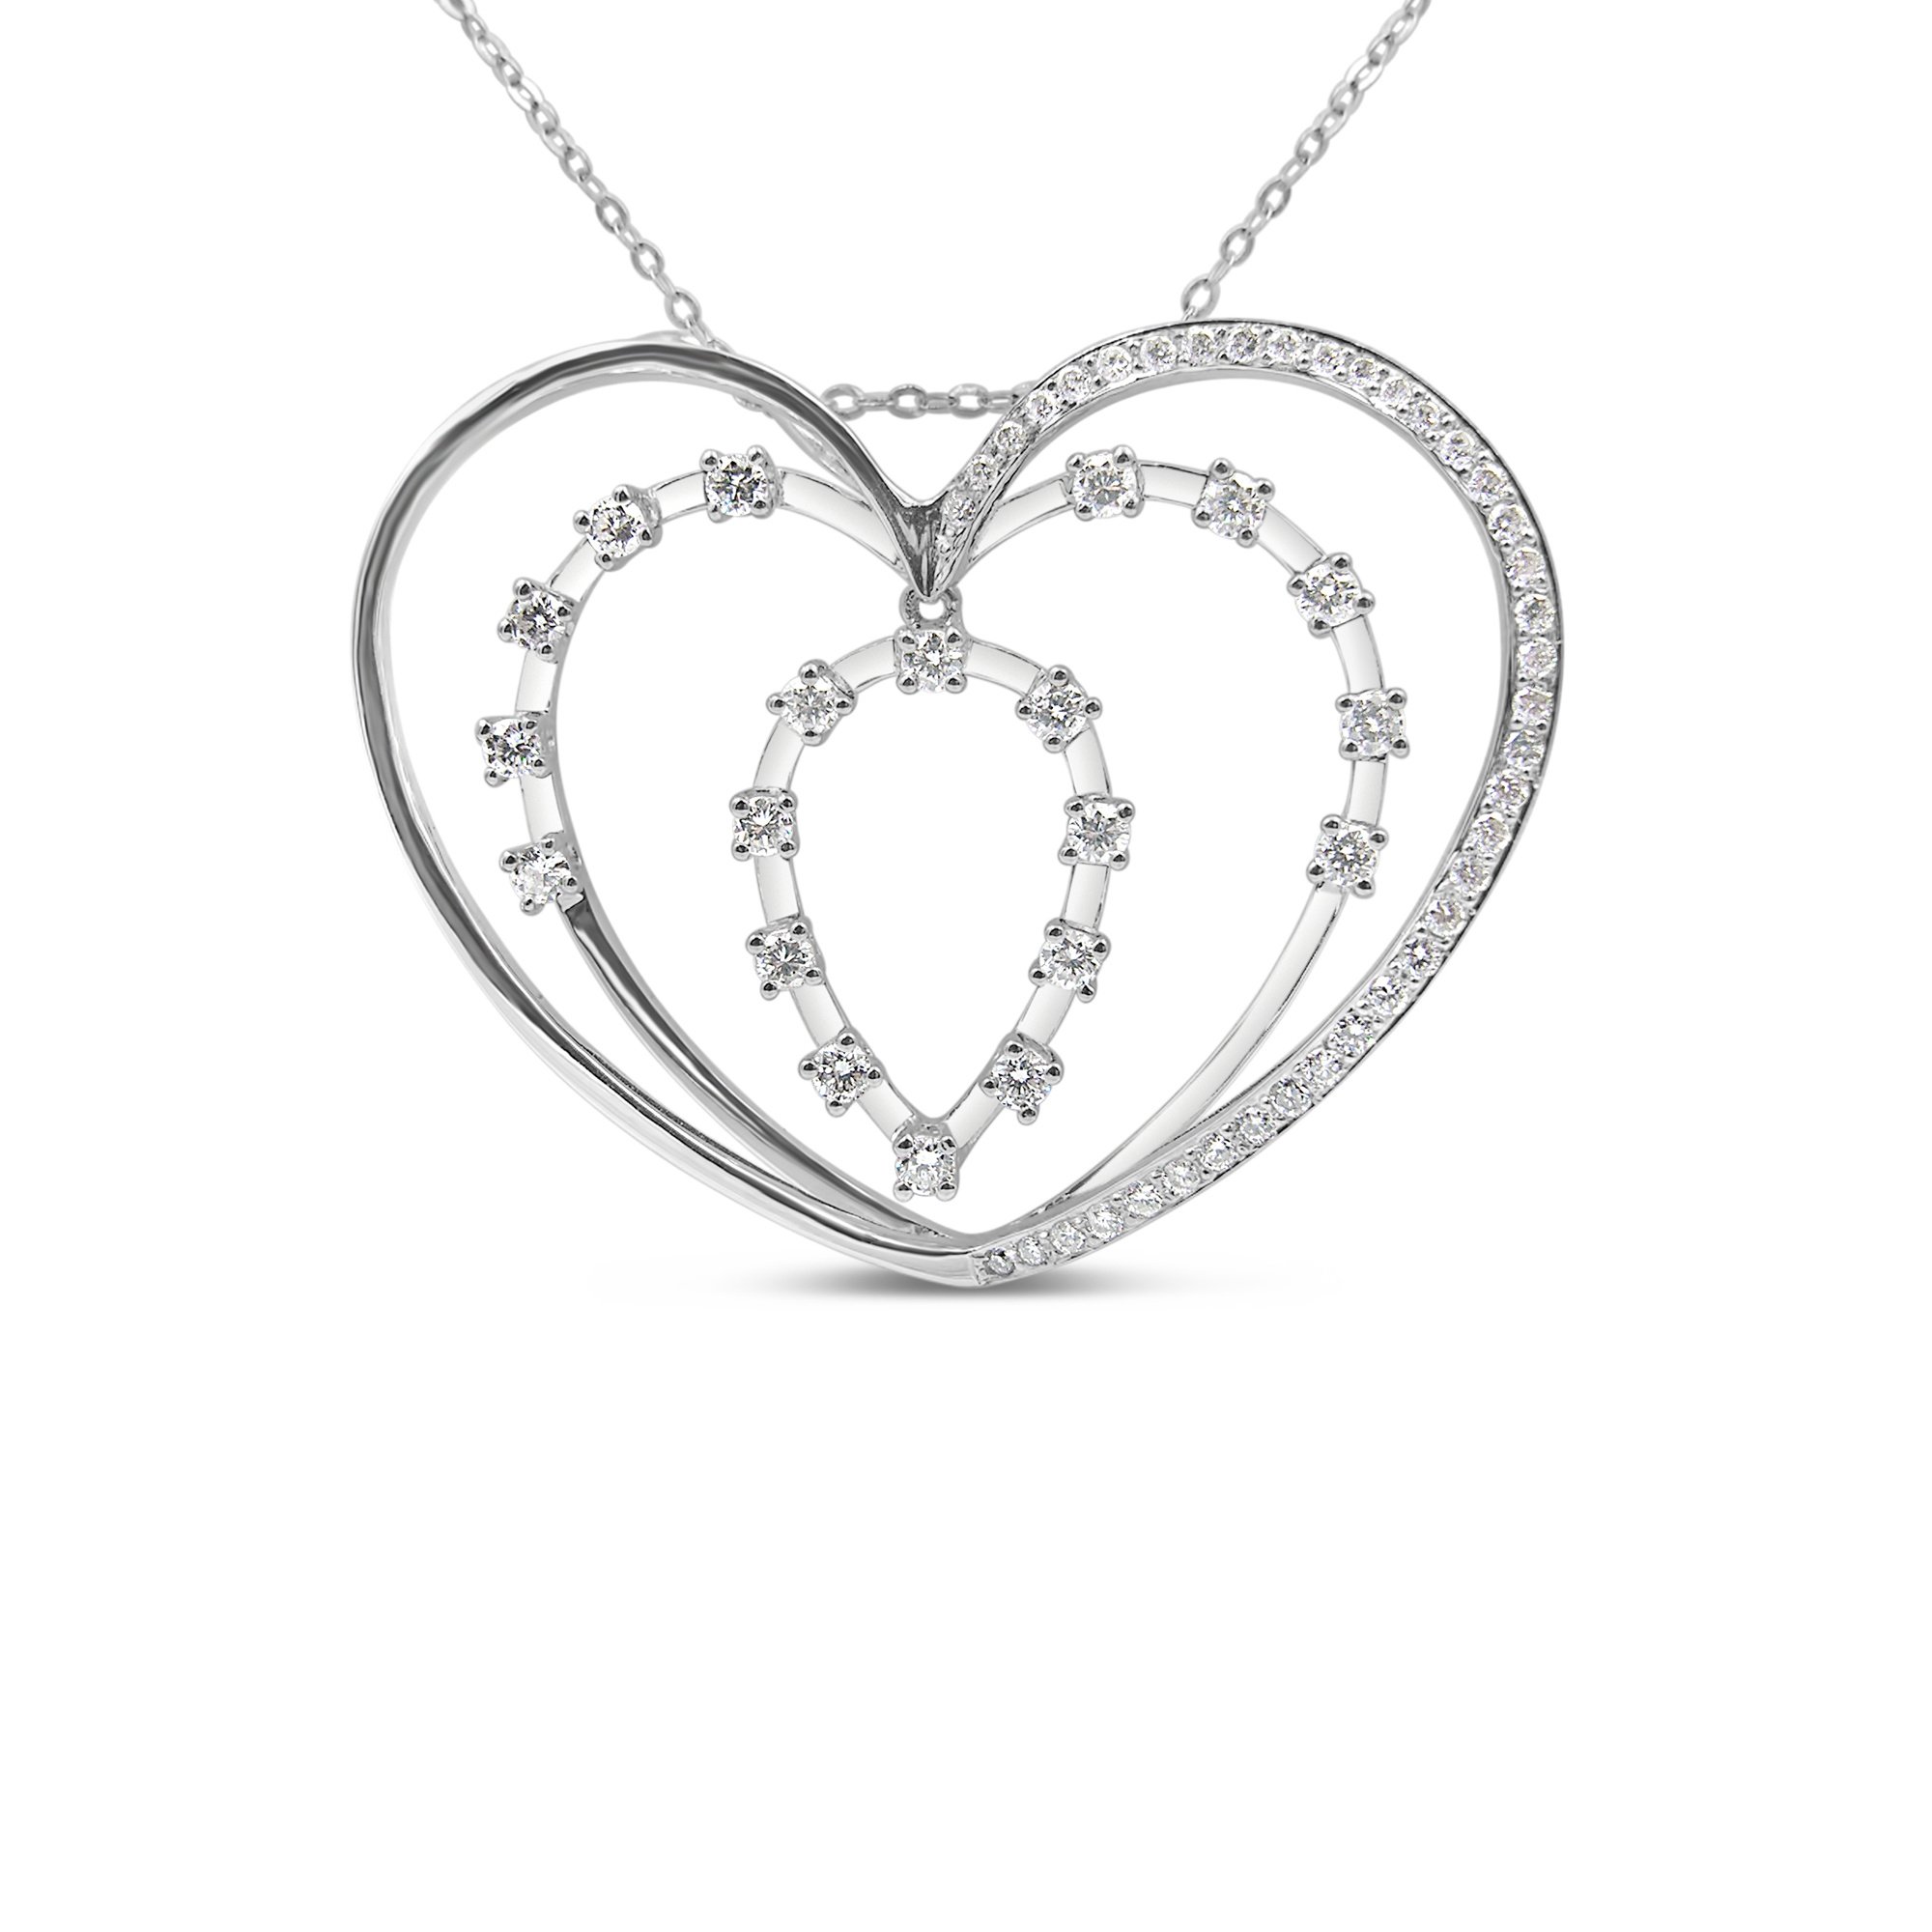 18kt white gold heart pendant with 0.83 ct diamonds